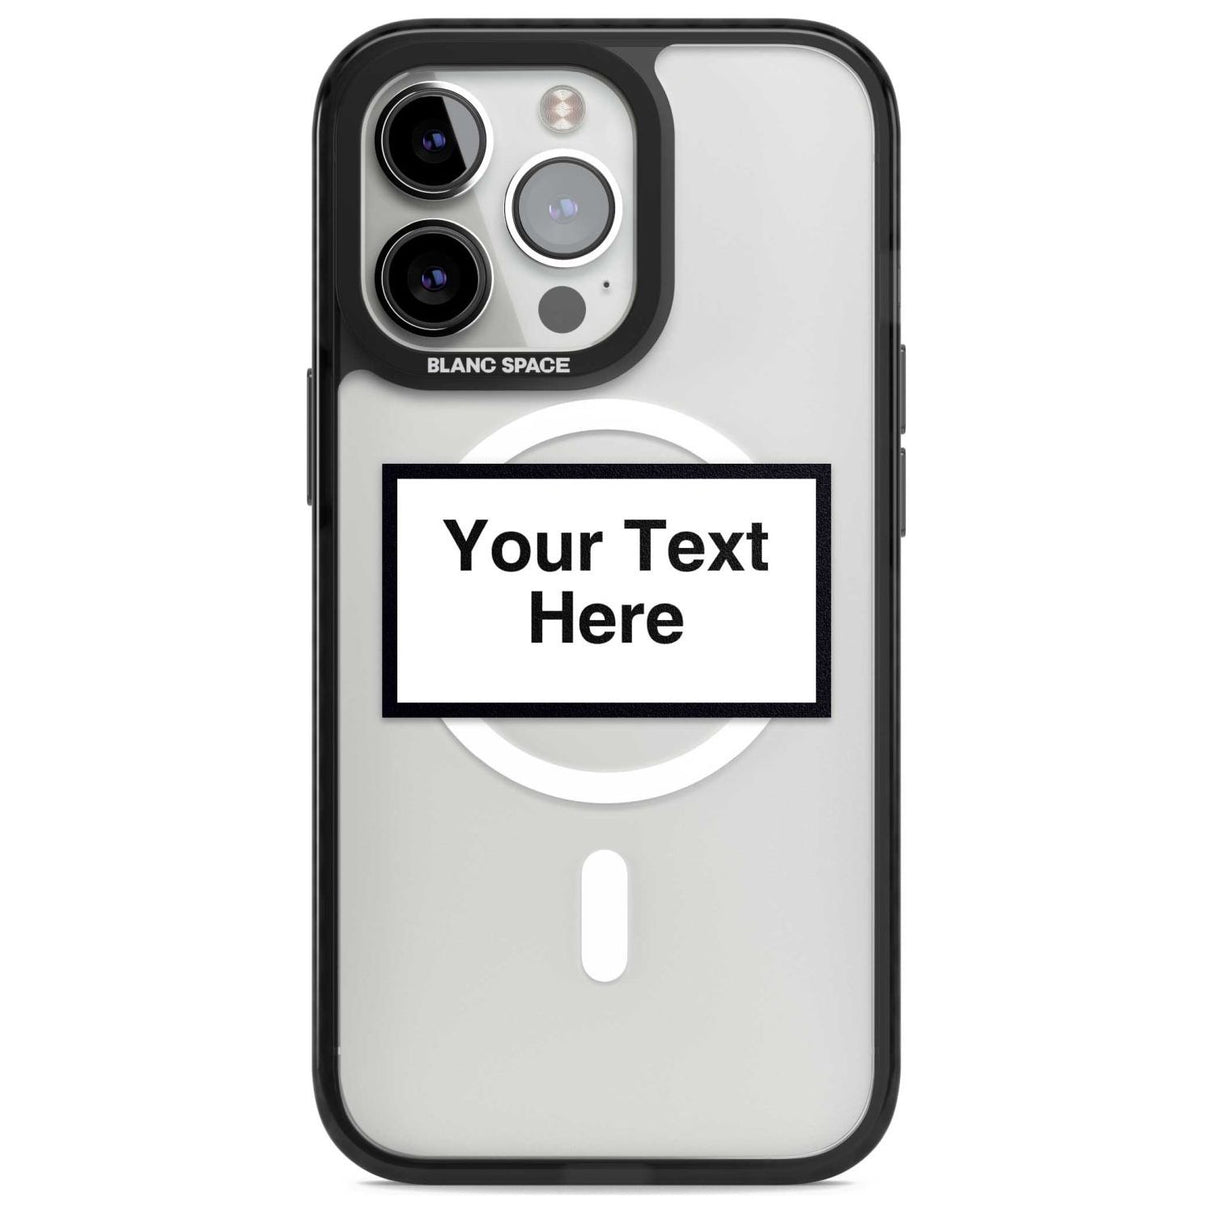 Personalised Create your own Warning Label Custom Phone Case iPhone 15 Pro Max / Magsafe Black Impact Case,iPhone 15 Pro / Magsafe Black Impact Case,iPhone 14 Pro Max / Magsafe Black Impact Case,iPhone 14 Pro / Magsafe Black Impact Case,iPhone 13 Pro / Magsafe Black Impact Case Blanc Space